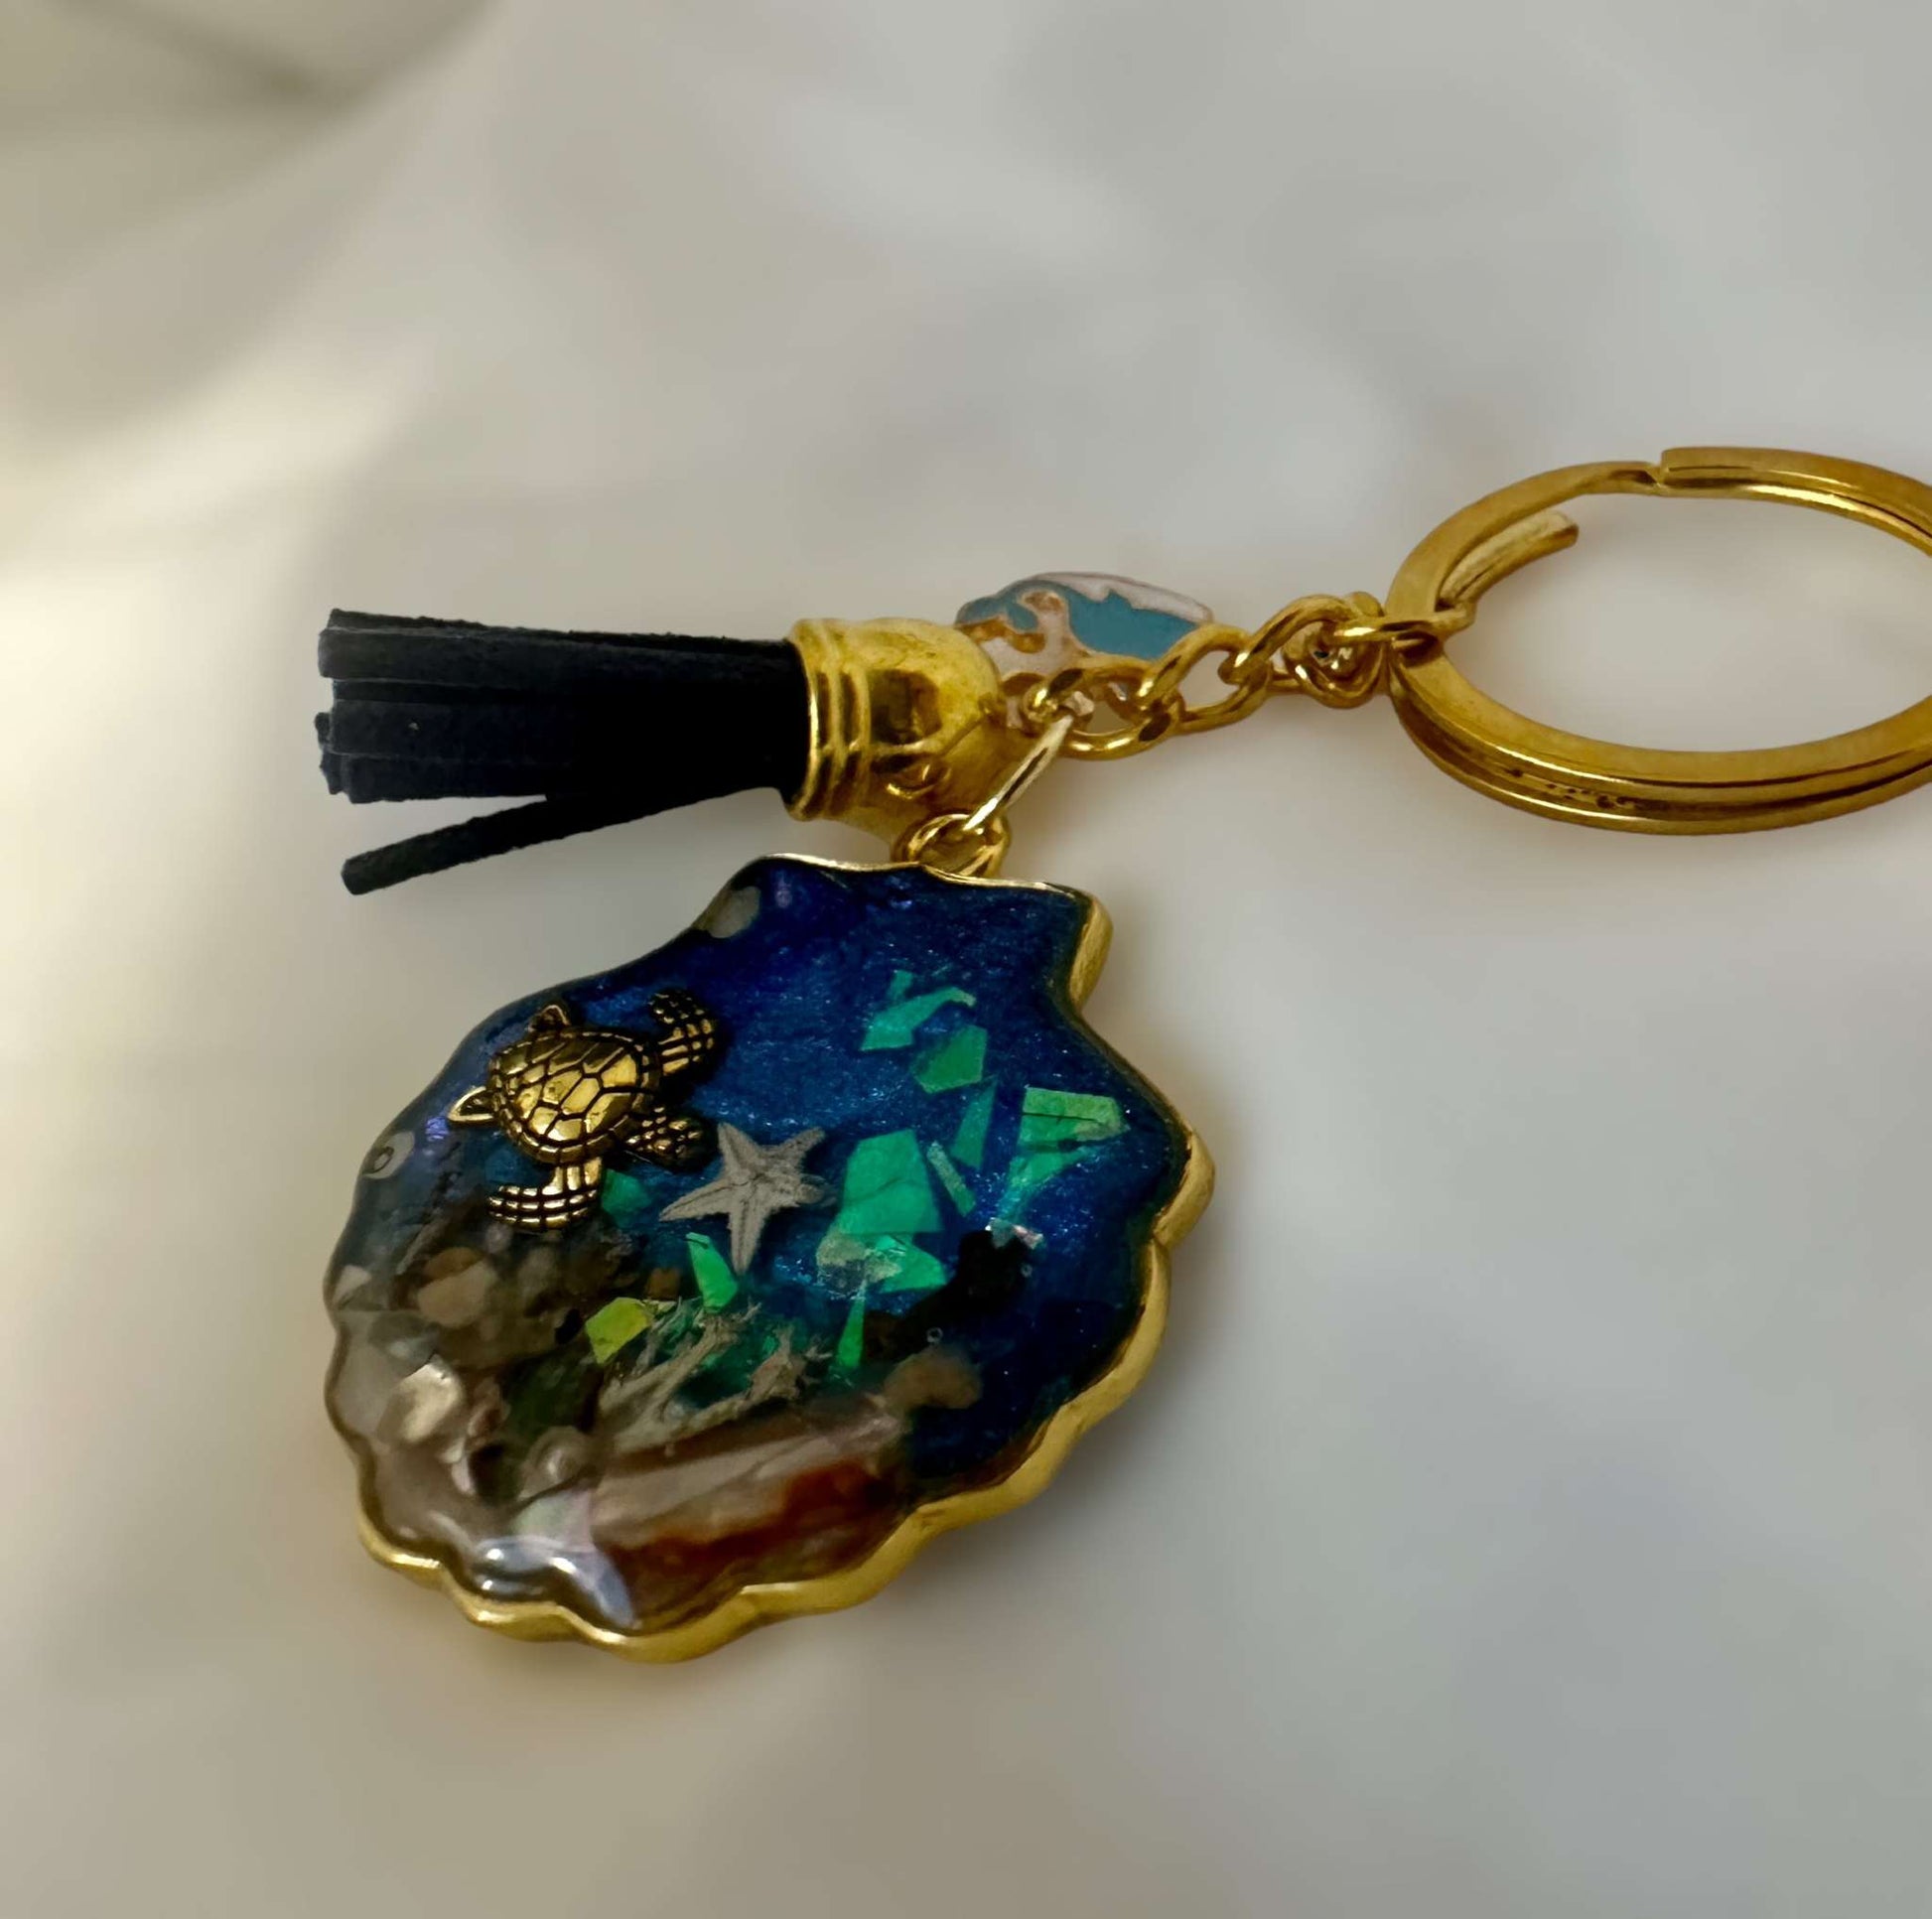 Keychain Handmade with Resin -  Carry a Piece of the Sea with You